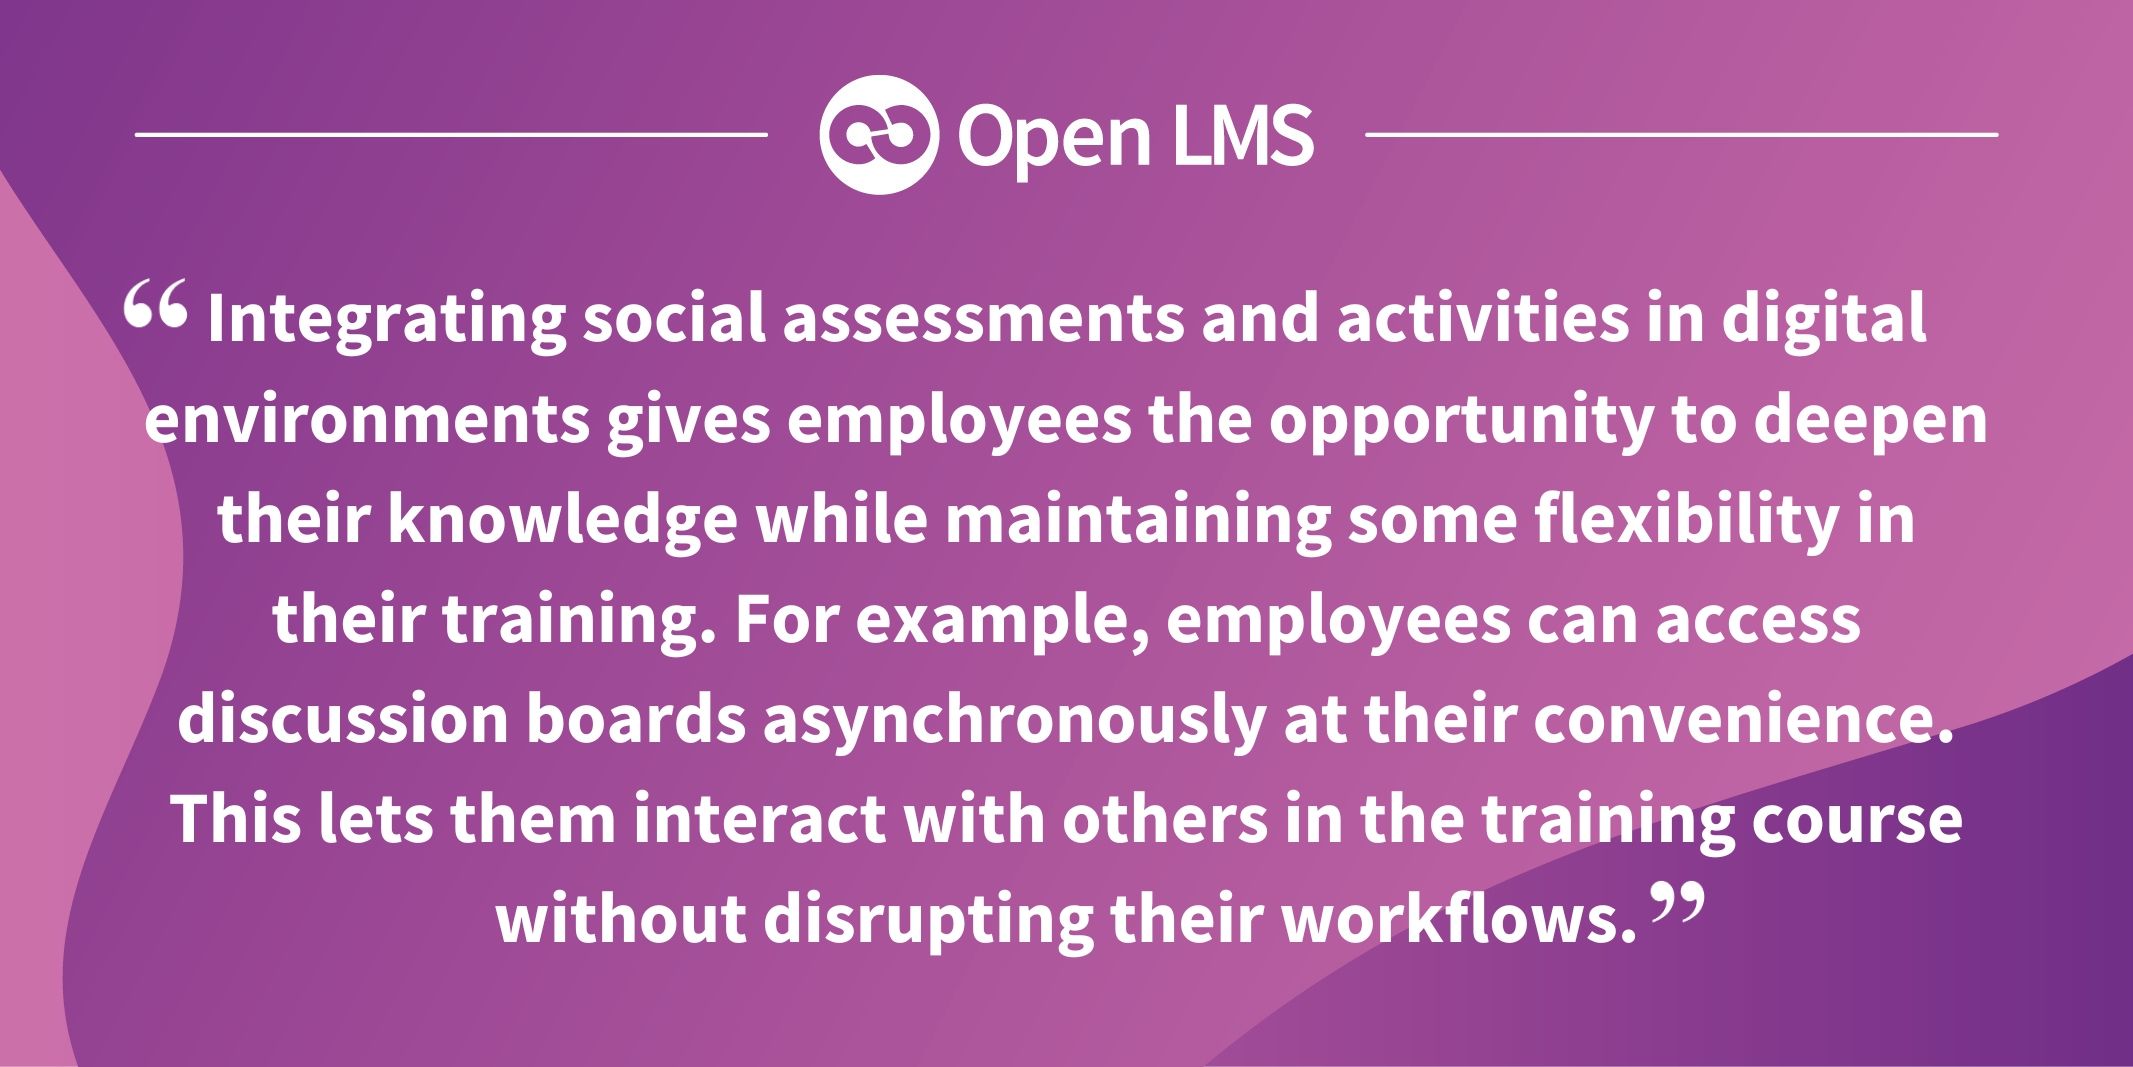 Integrating social assessments and activities in digital environments gives employees the opportunity to deepen their knowledge while maintaining some flexibility in their training. For example, employees can access discussion boards asynchronously at their convenience. This lets them interact with others in the training course without disrupting their workflows